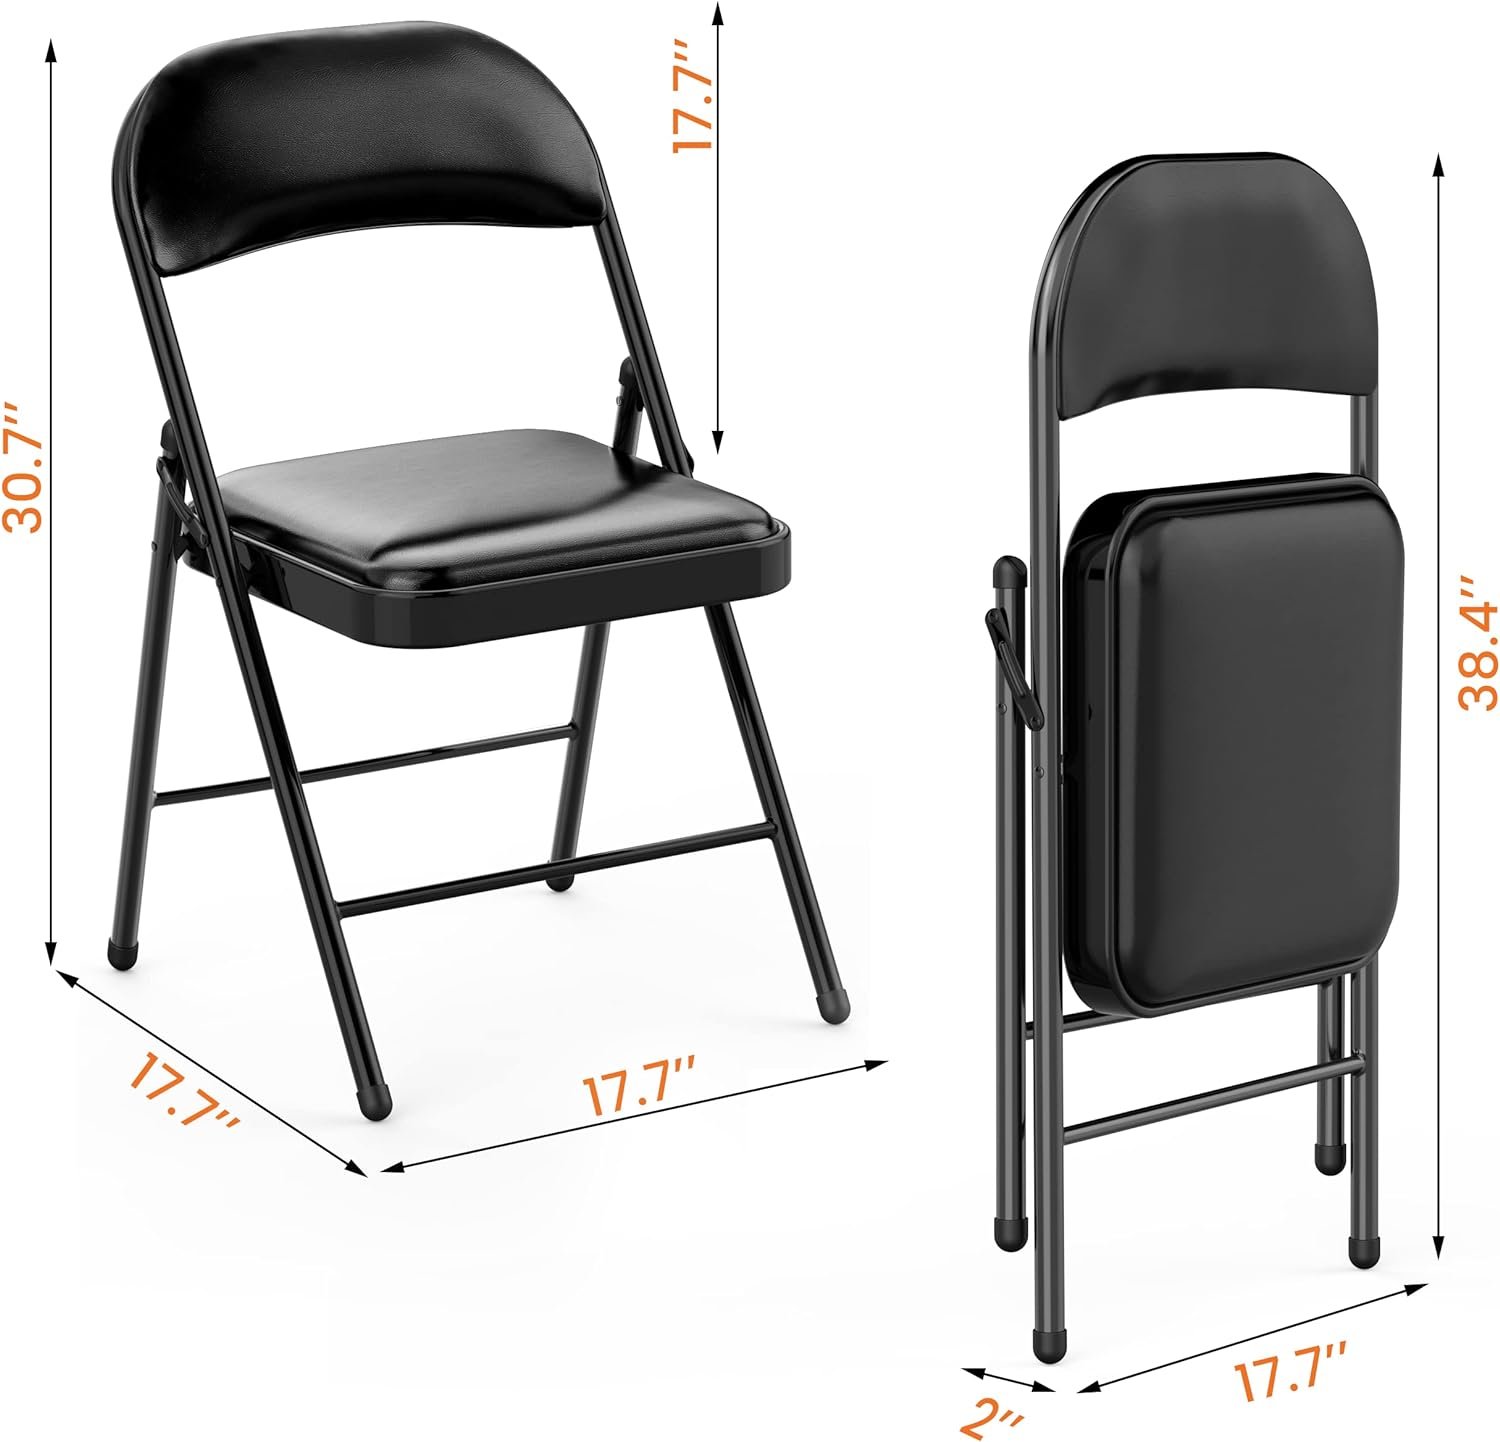 YJHome Folding Chairs with Padded Seats Review